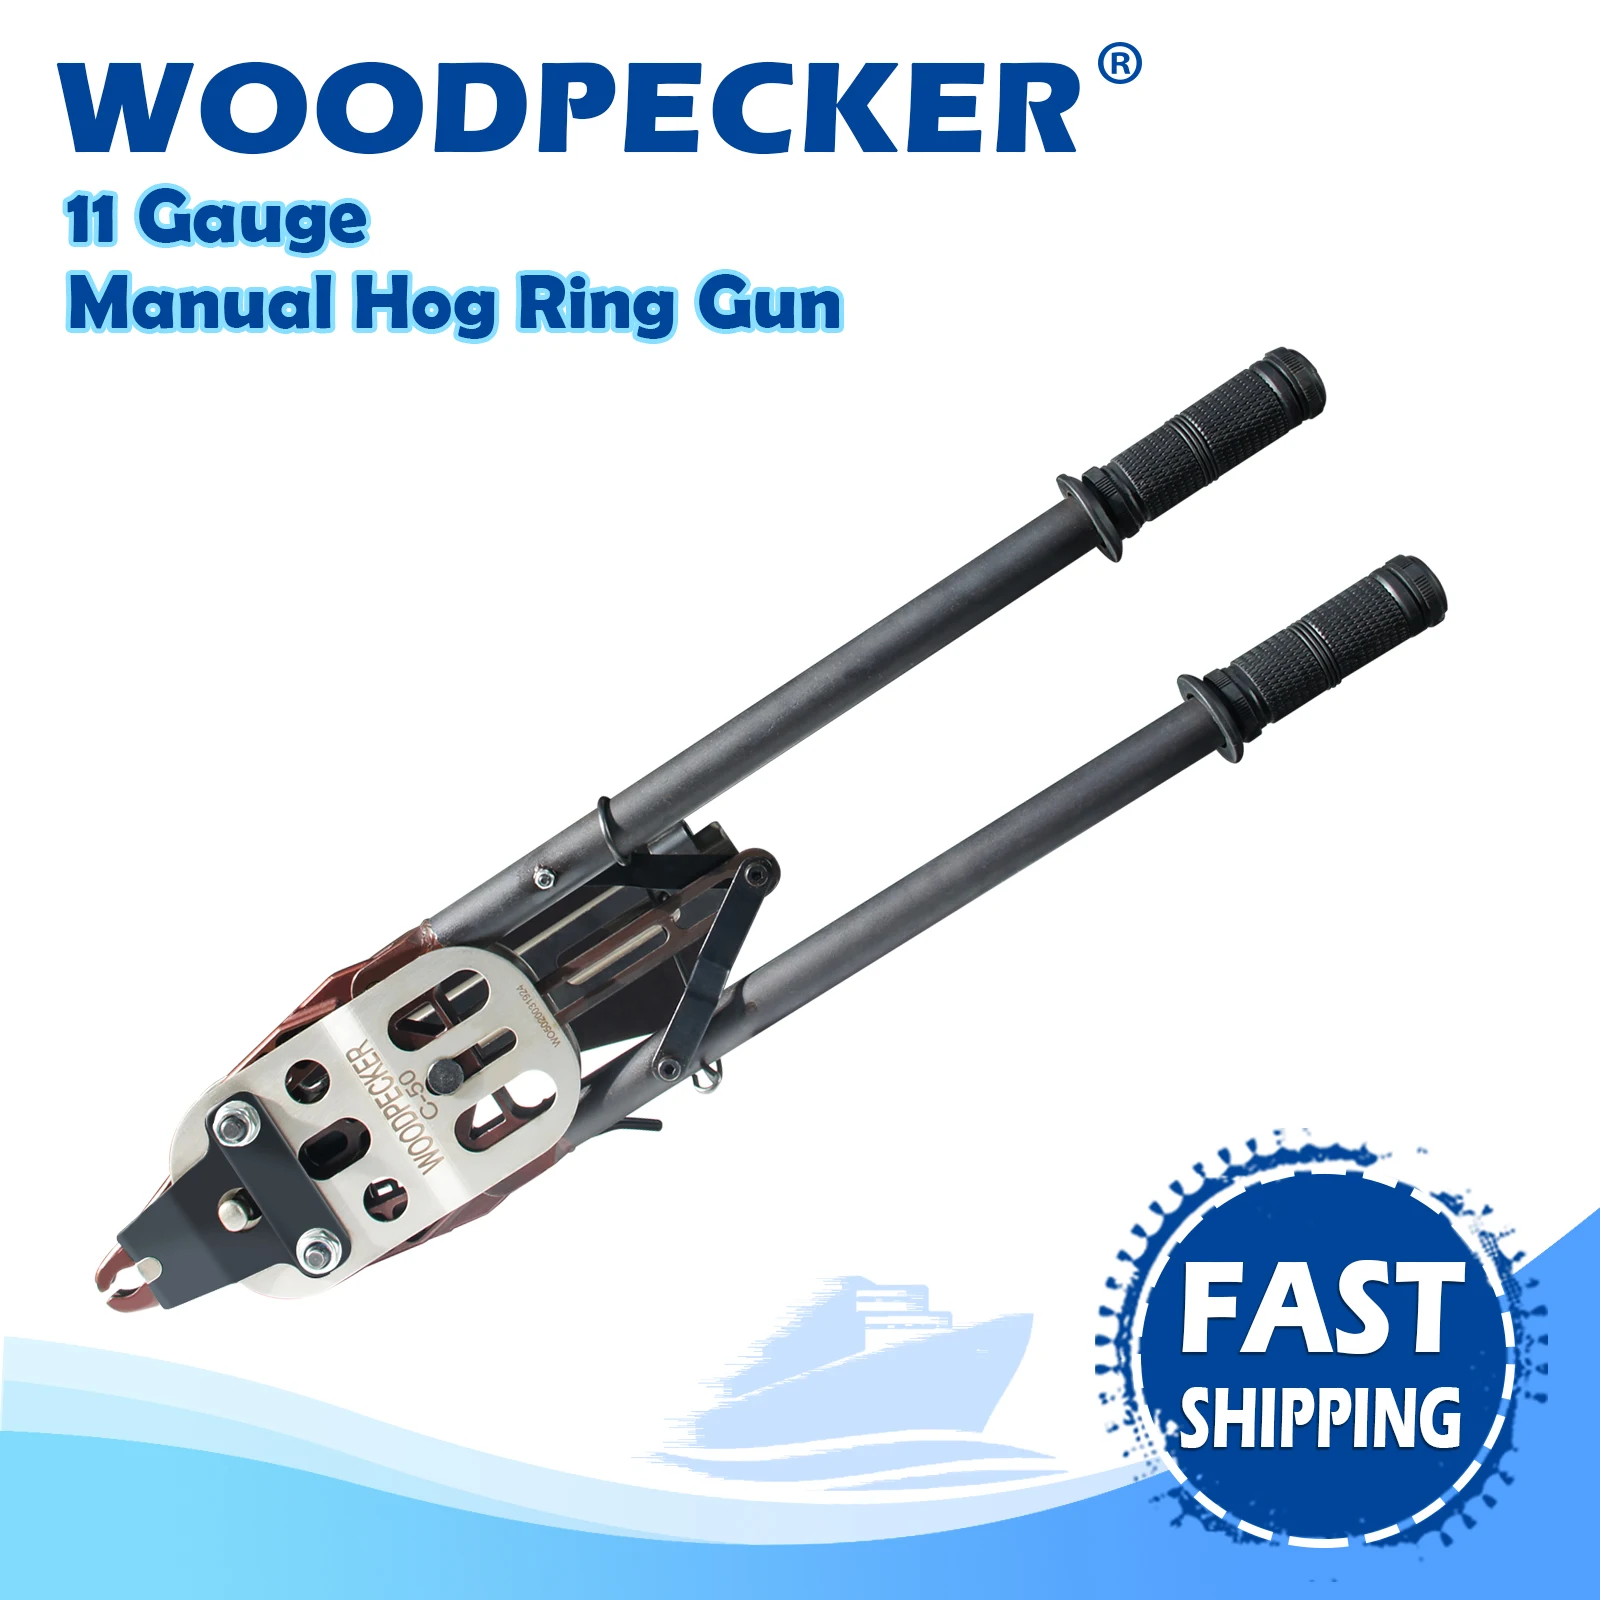 WOODPECKER C50 11 Gauge Heavy-Duty Manual Hog Ring Gun, Snap-Ring Plier with Auto-feed System, 45mm Crown for Wire Cages,Fencing 1 8 bspt oil pressure sensor tee to npt adapter turbo supply feed line gauge